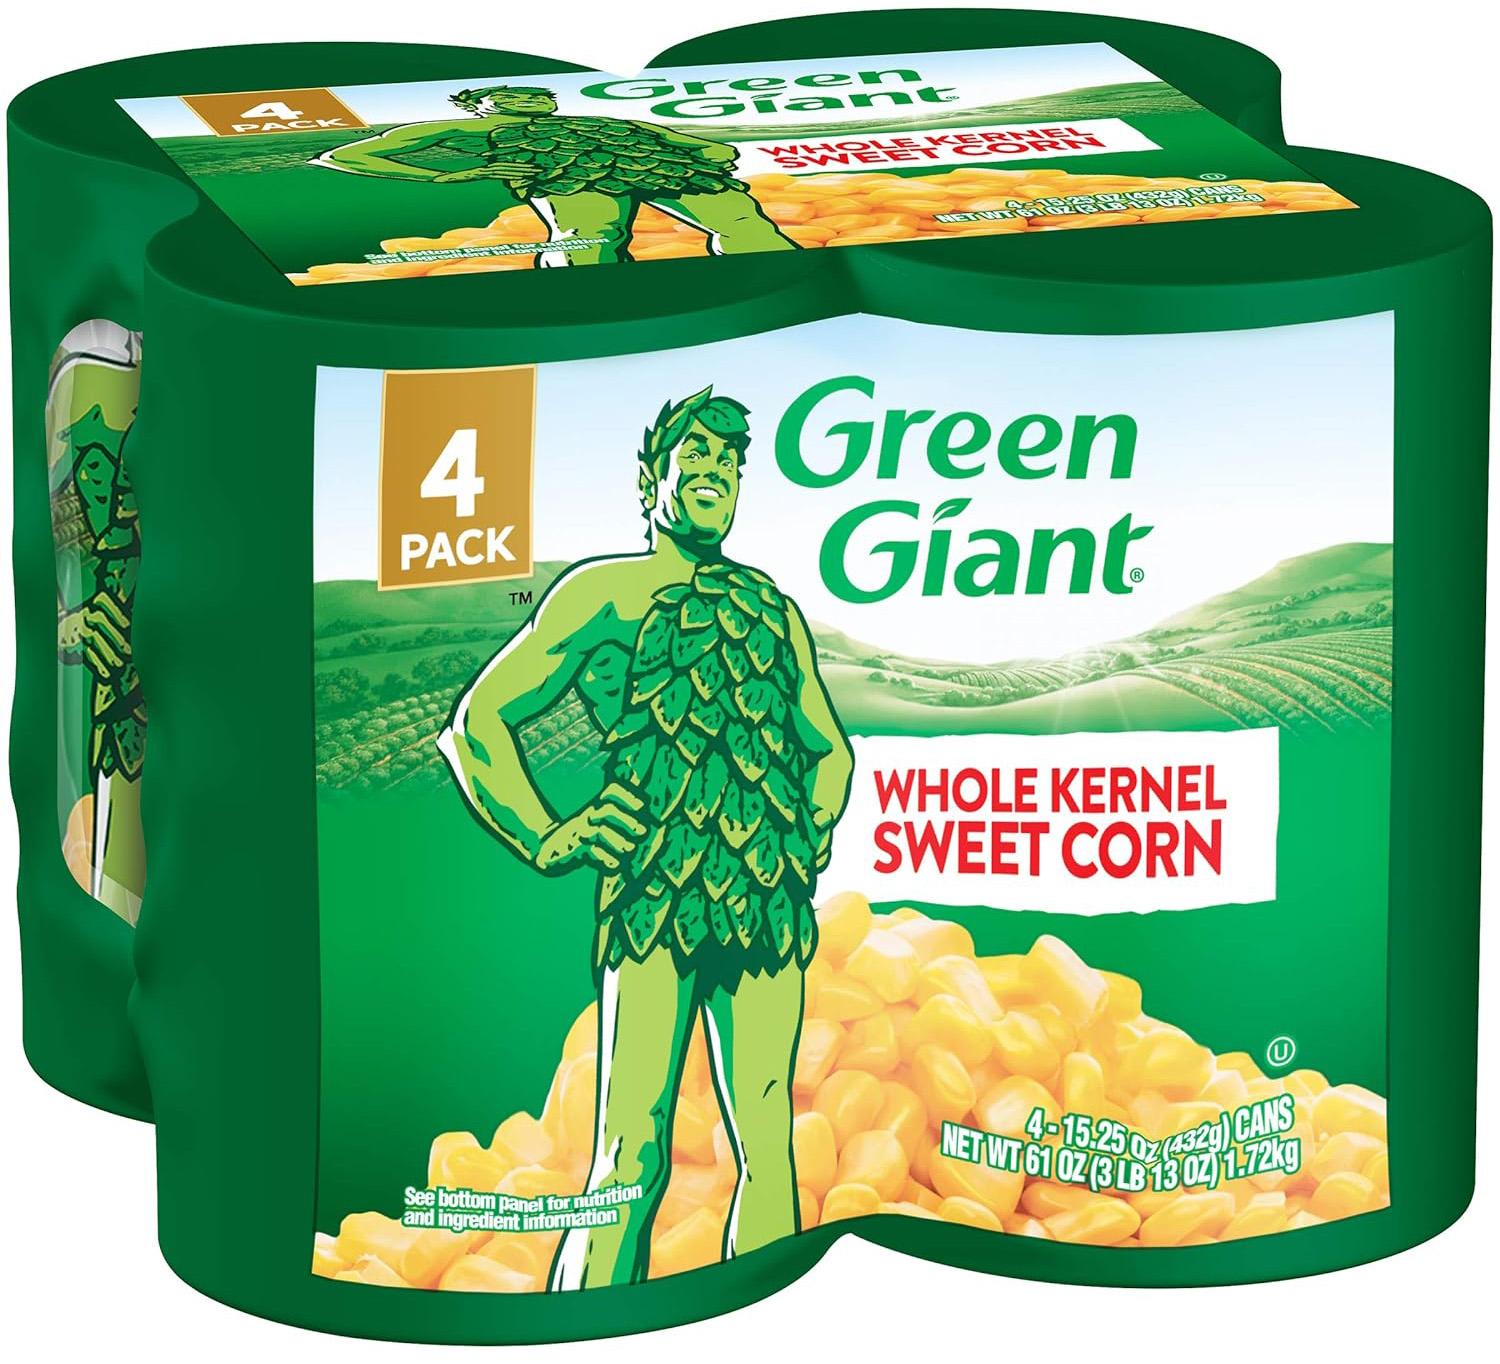 Green Giant Whole Kernel Sweet Corn 4 Pack for $3.80